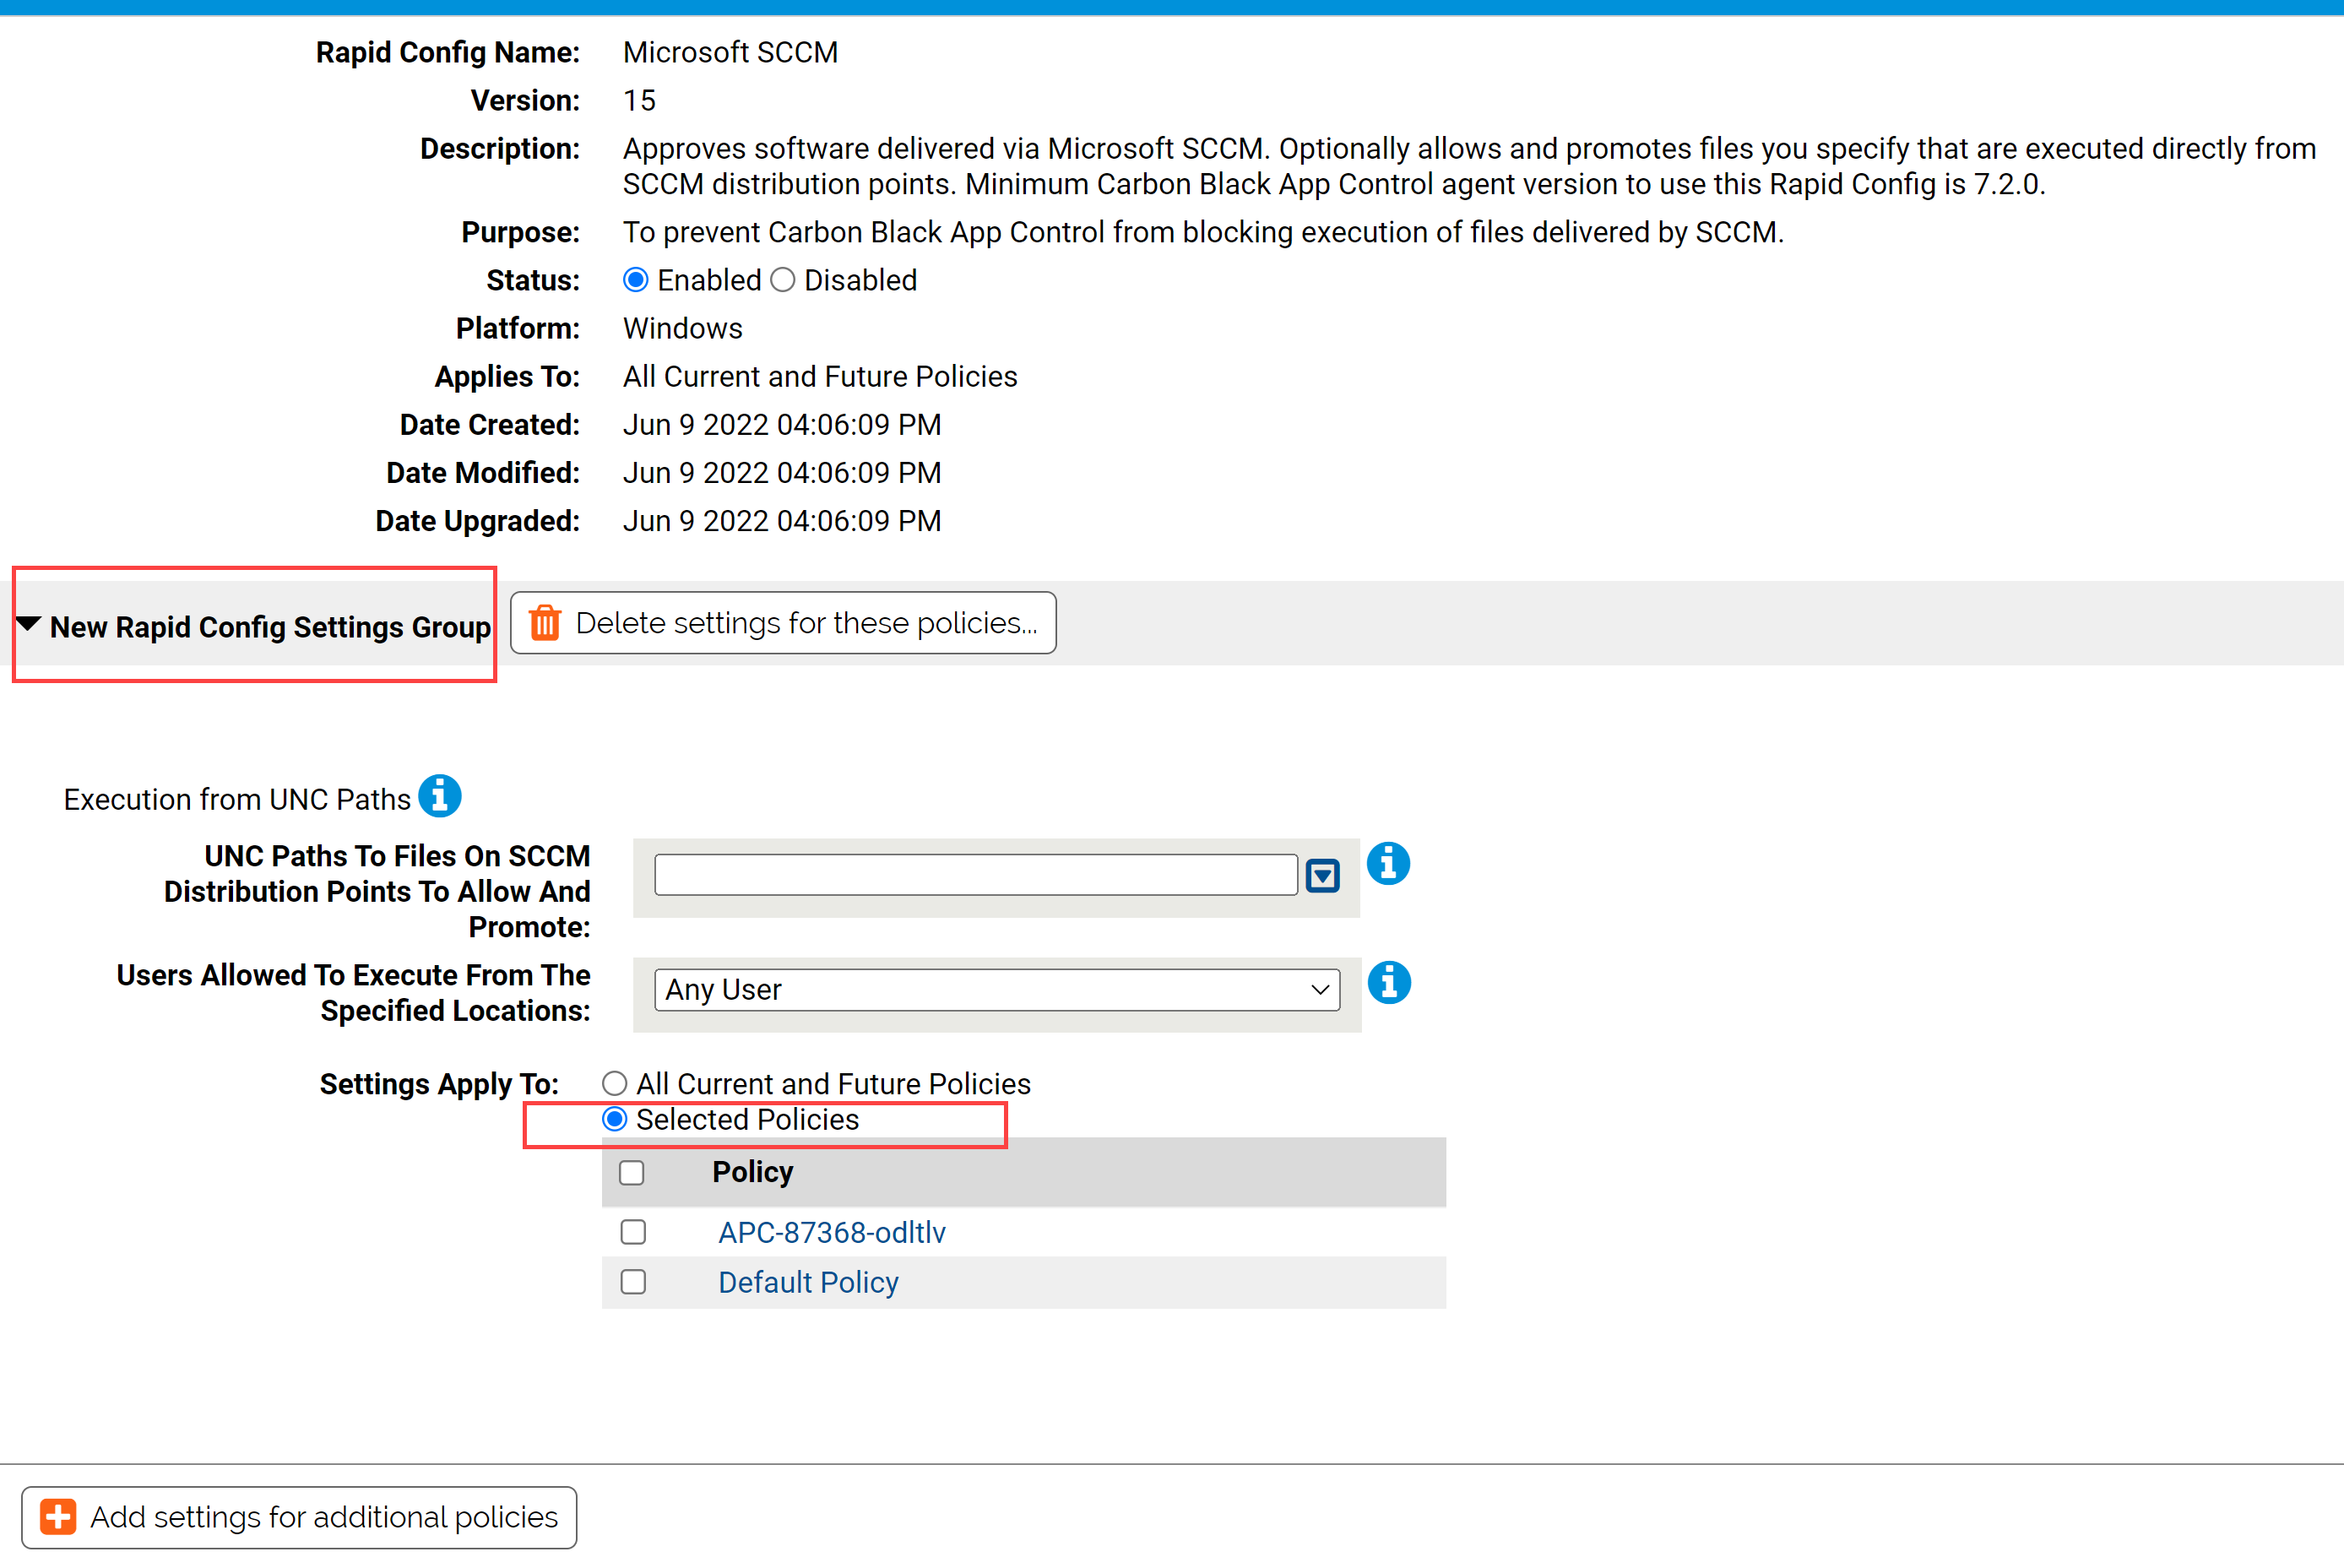 The New Rapid Config Settings Group showing the Settings Apply to field with the Selected Policies option selected